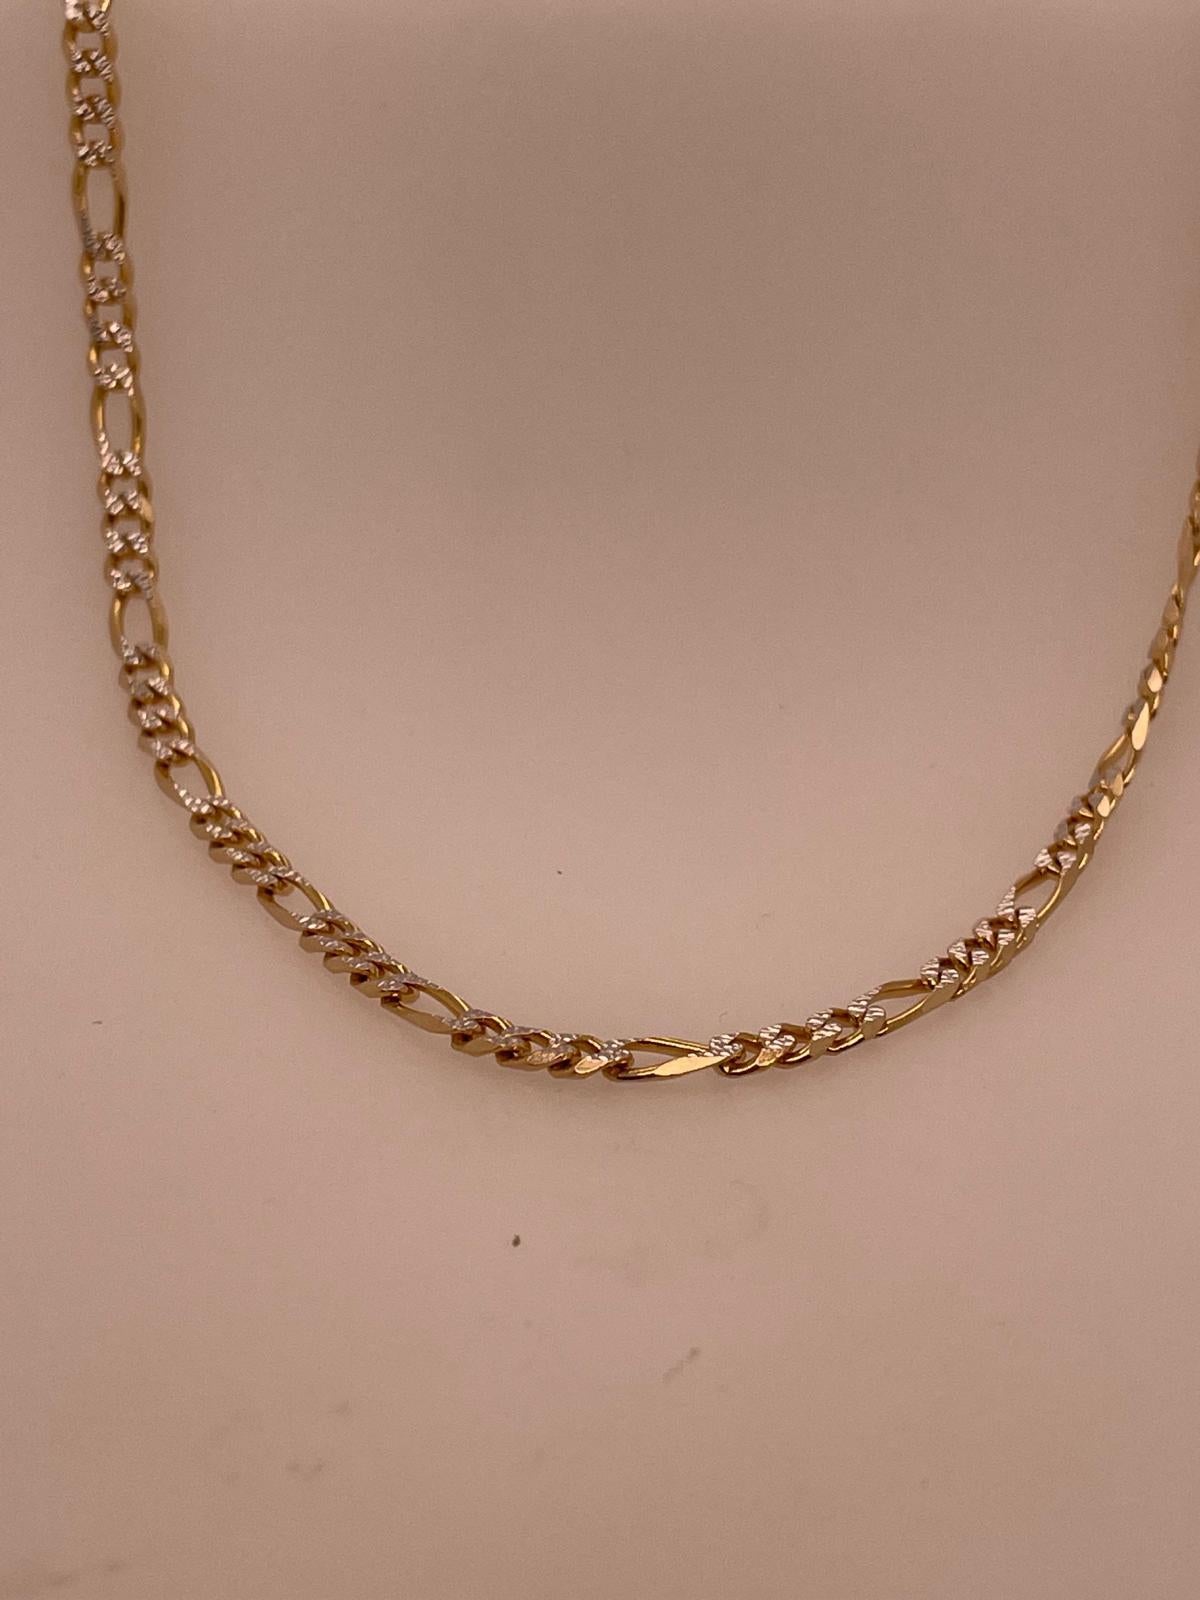 18k yellow gold curb link style chain with white gold detail  3